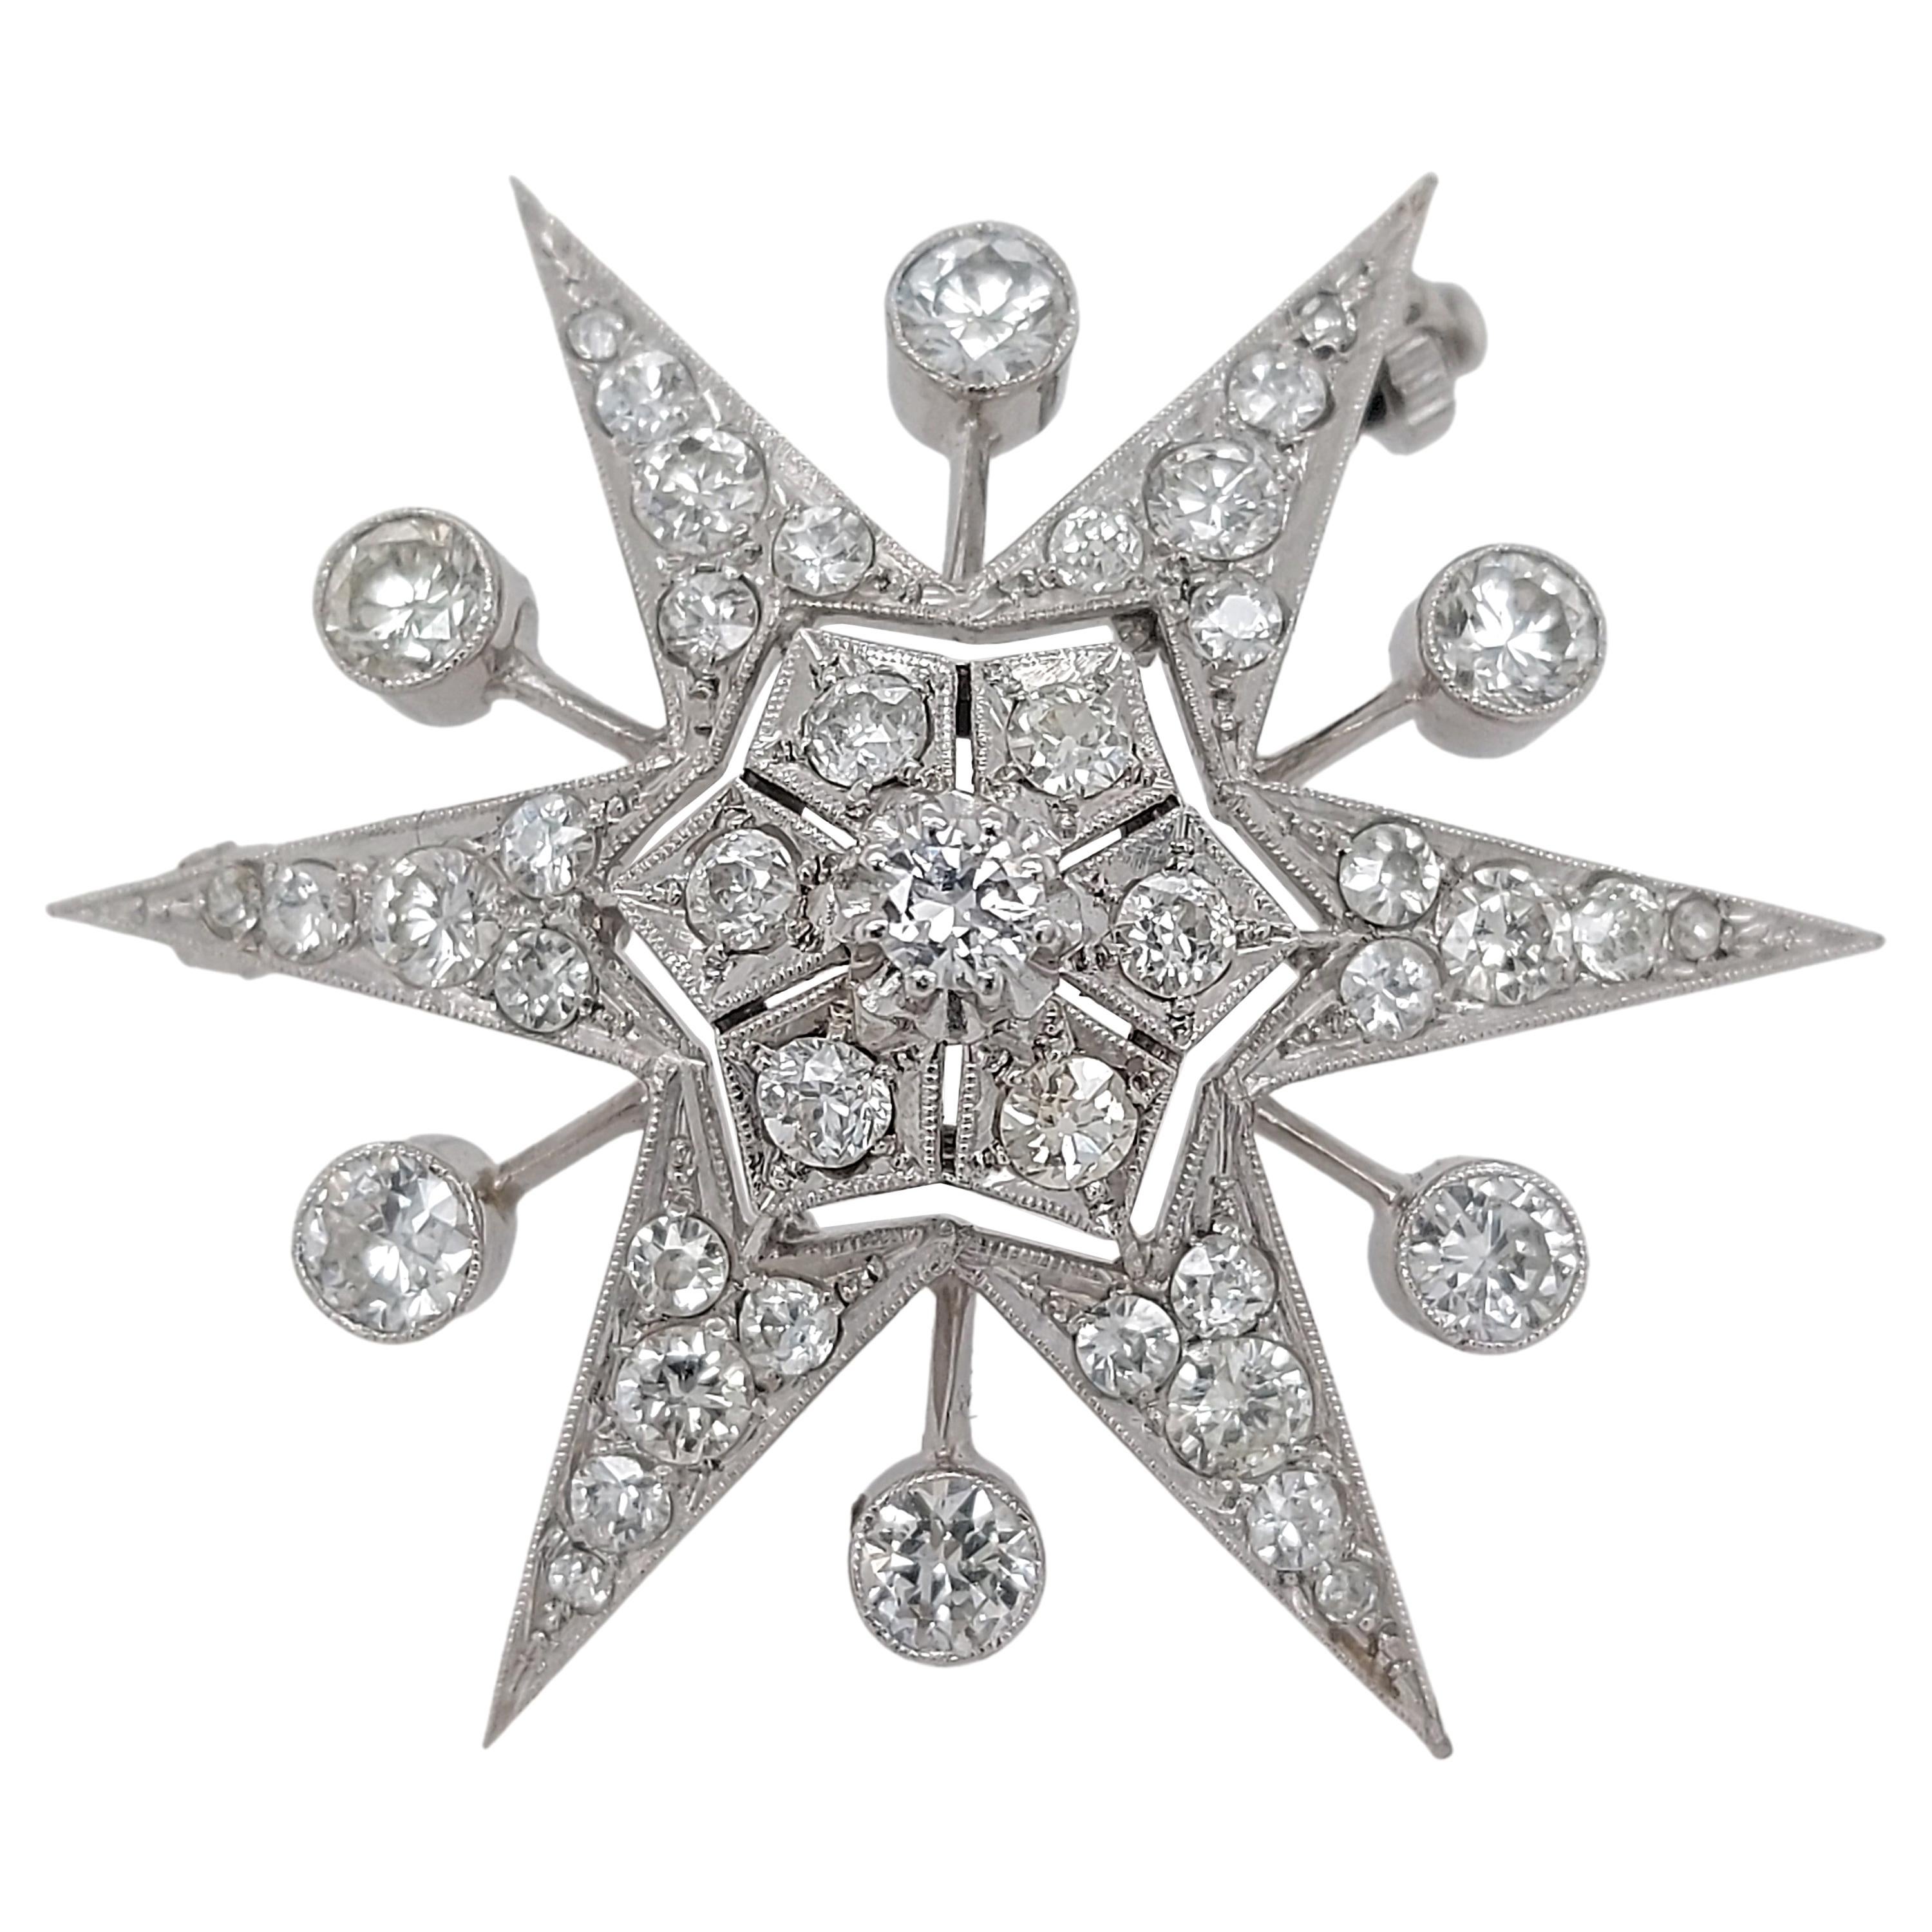 18kt White Gold Star Shape Brooch/Pendant with 3.8ct Diamonds